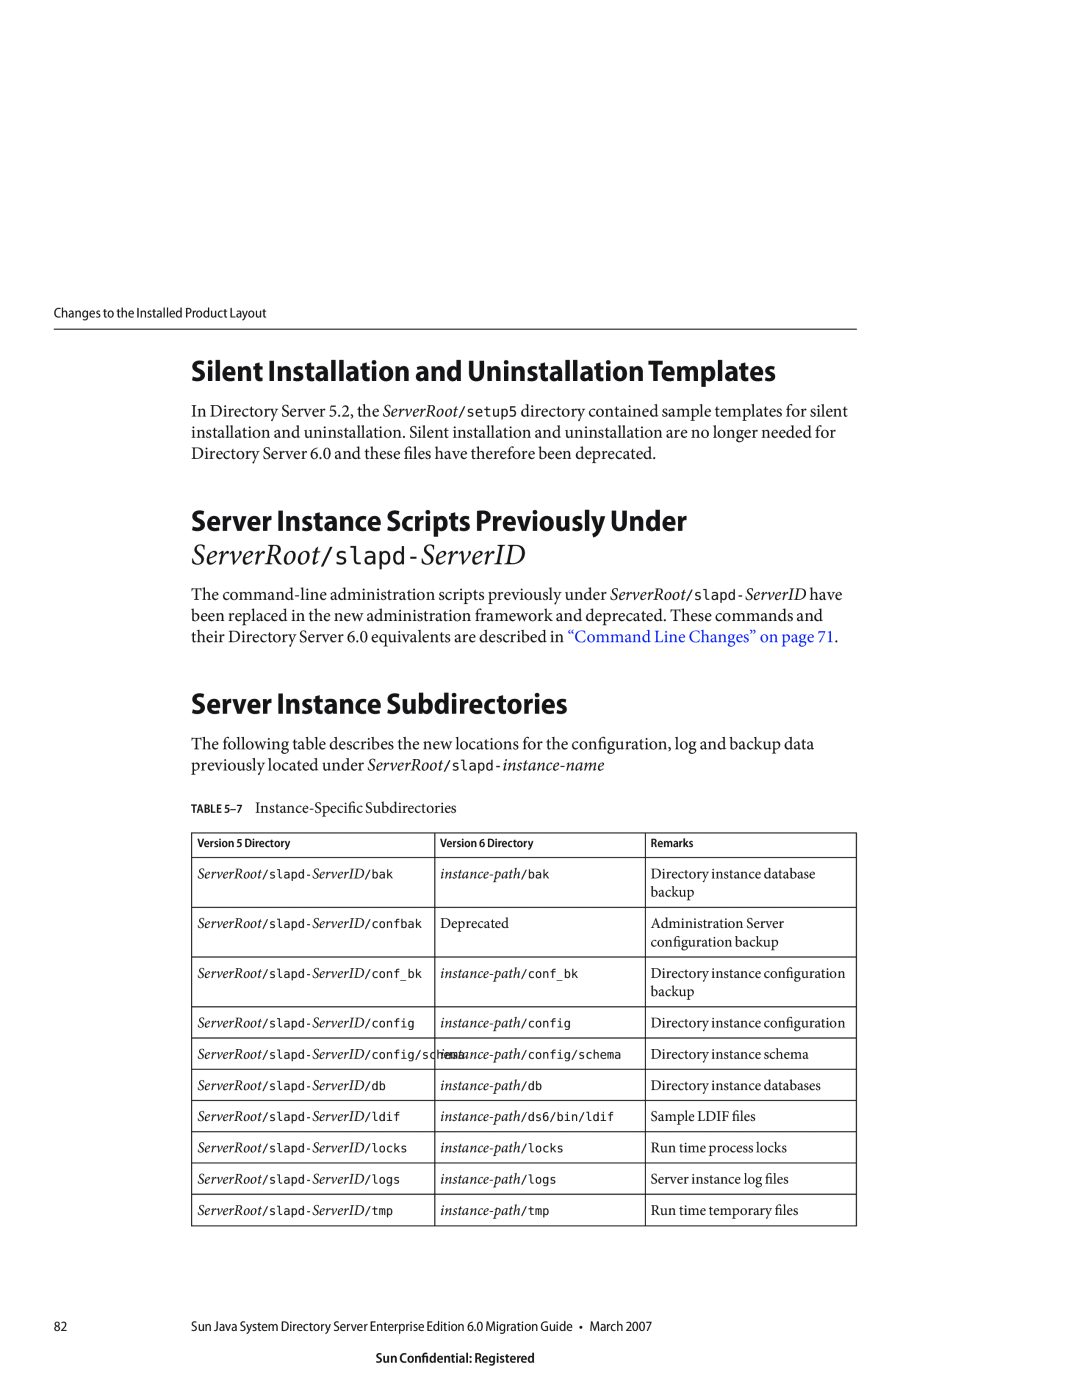 Sun Microsystems 8190994 manual Silent Installation and Uninstallation Templates, Server Instance Scripts Previously Under 